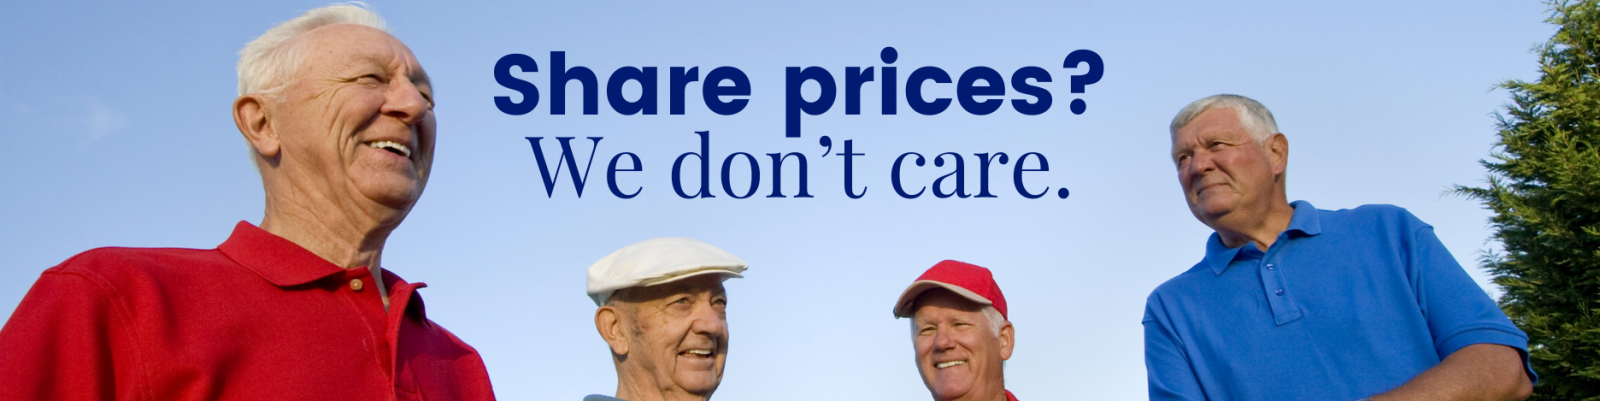 Retiree Investors: Share prices? We don't care.